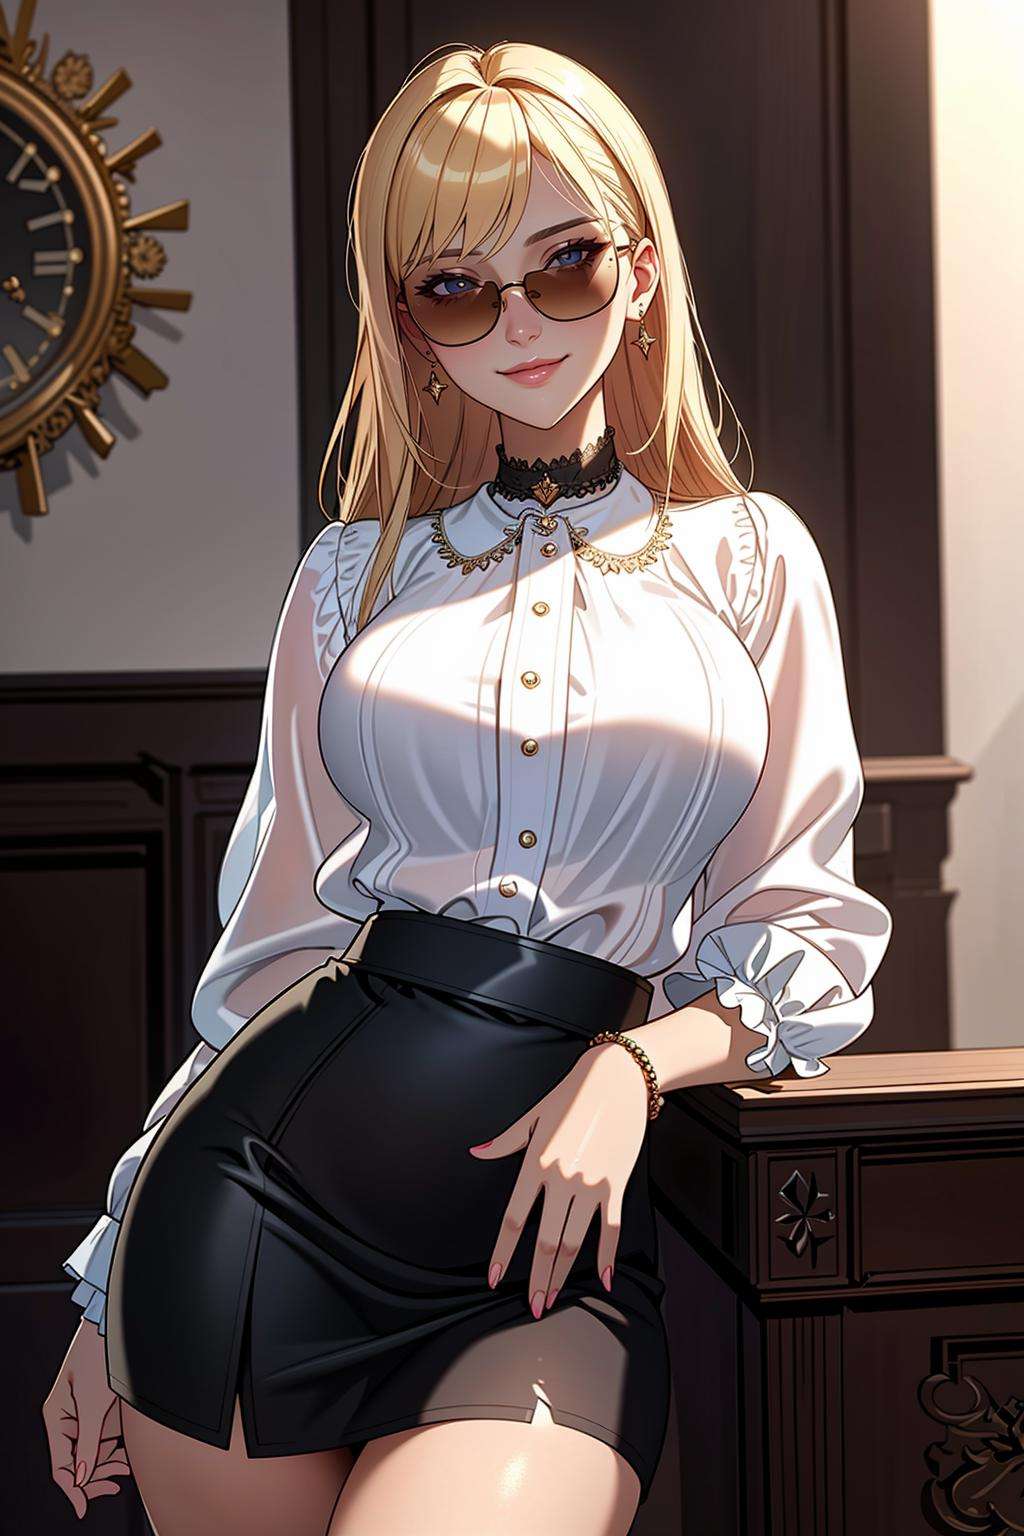 ((Masterpiece, best quality)),edgQuality,smirk,smug, blonde Nadia with sunglasses and a chokeredgCT, a woman in a blouse, and a skirt,wearing edgCT,chic top  <lora:edgChicTops1:0.9> <lora:Ultimate_Nadia:0.6>